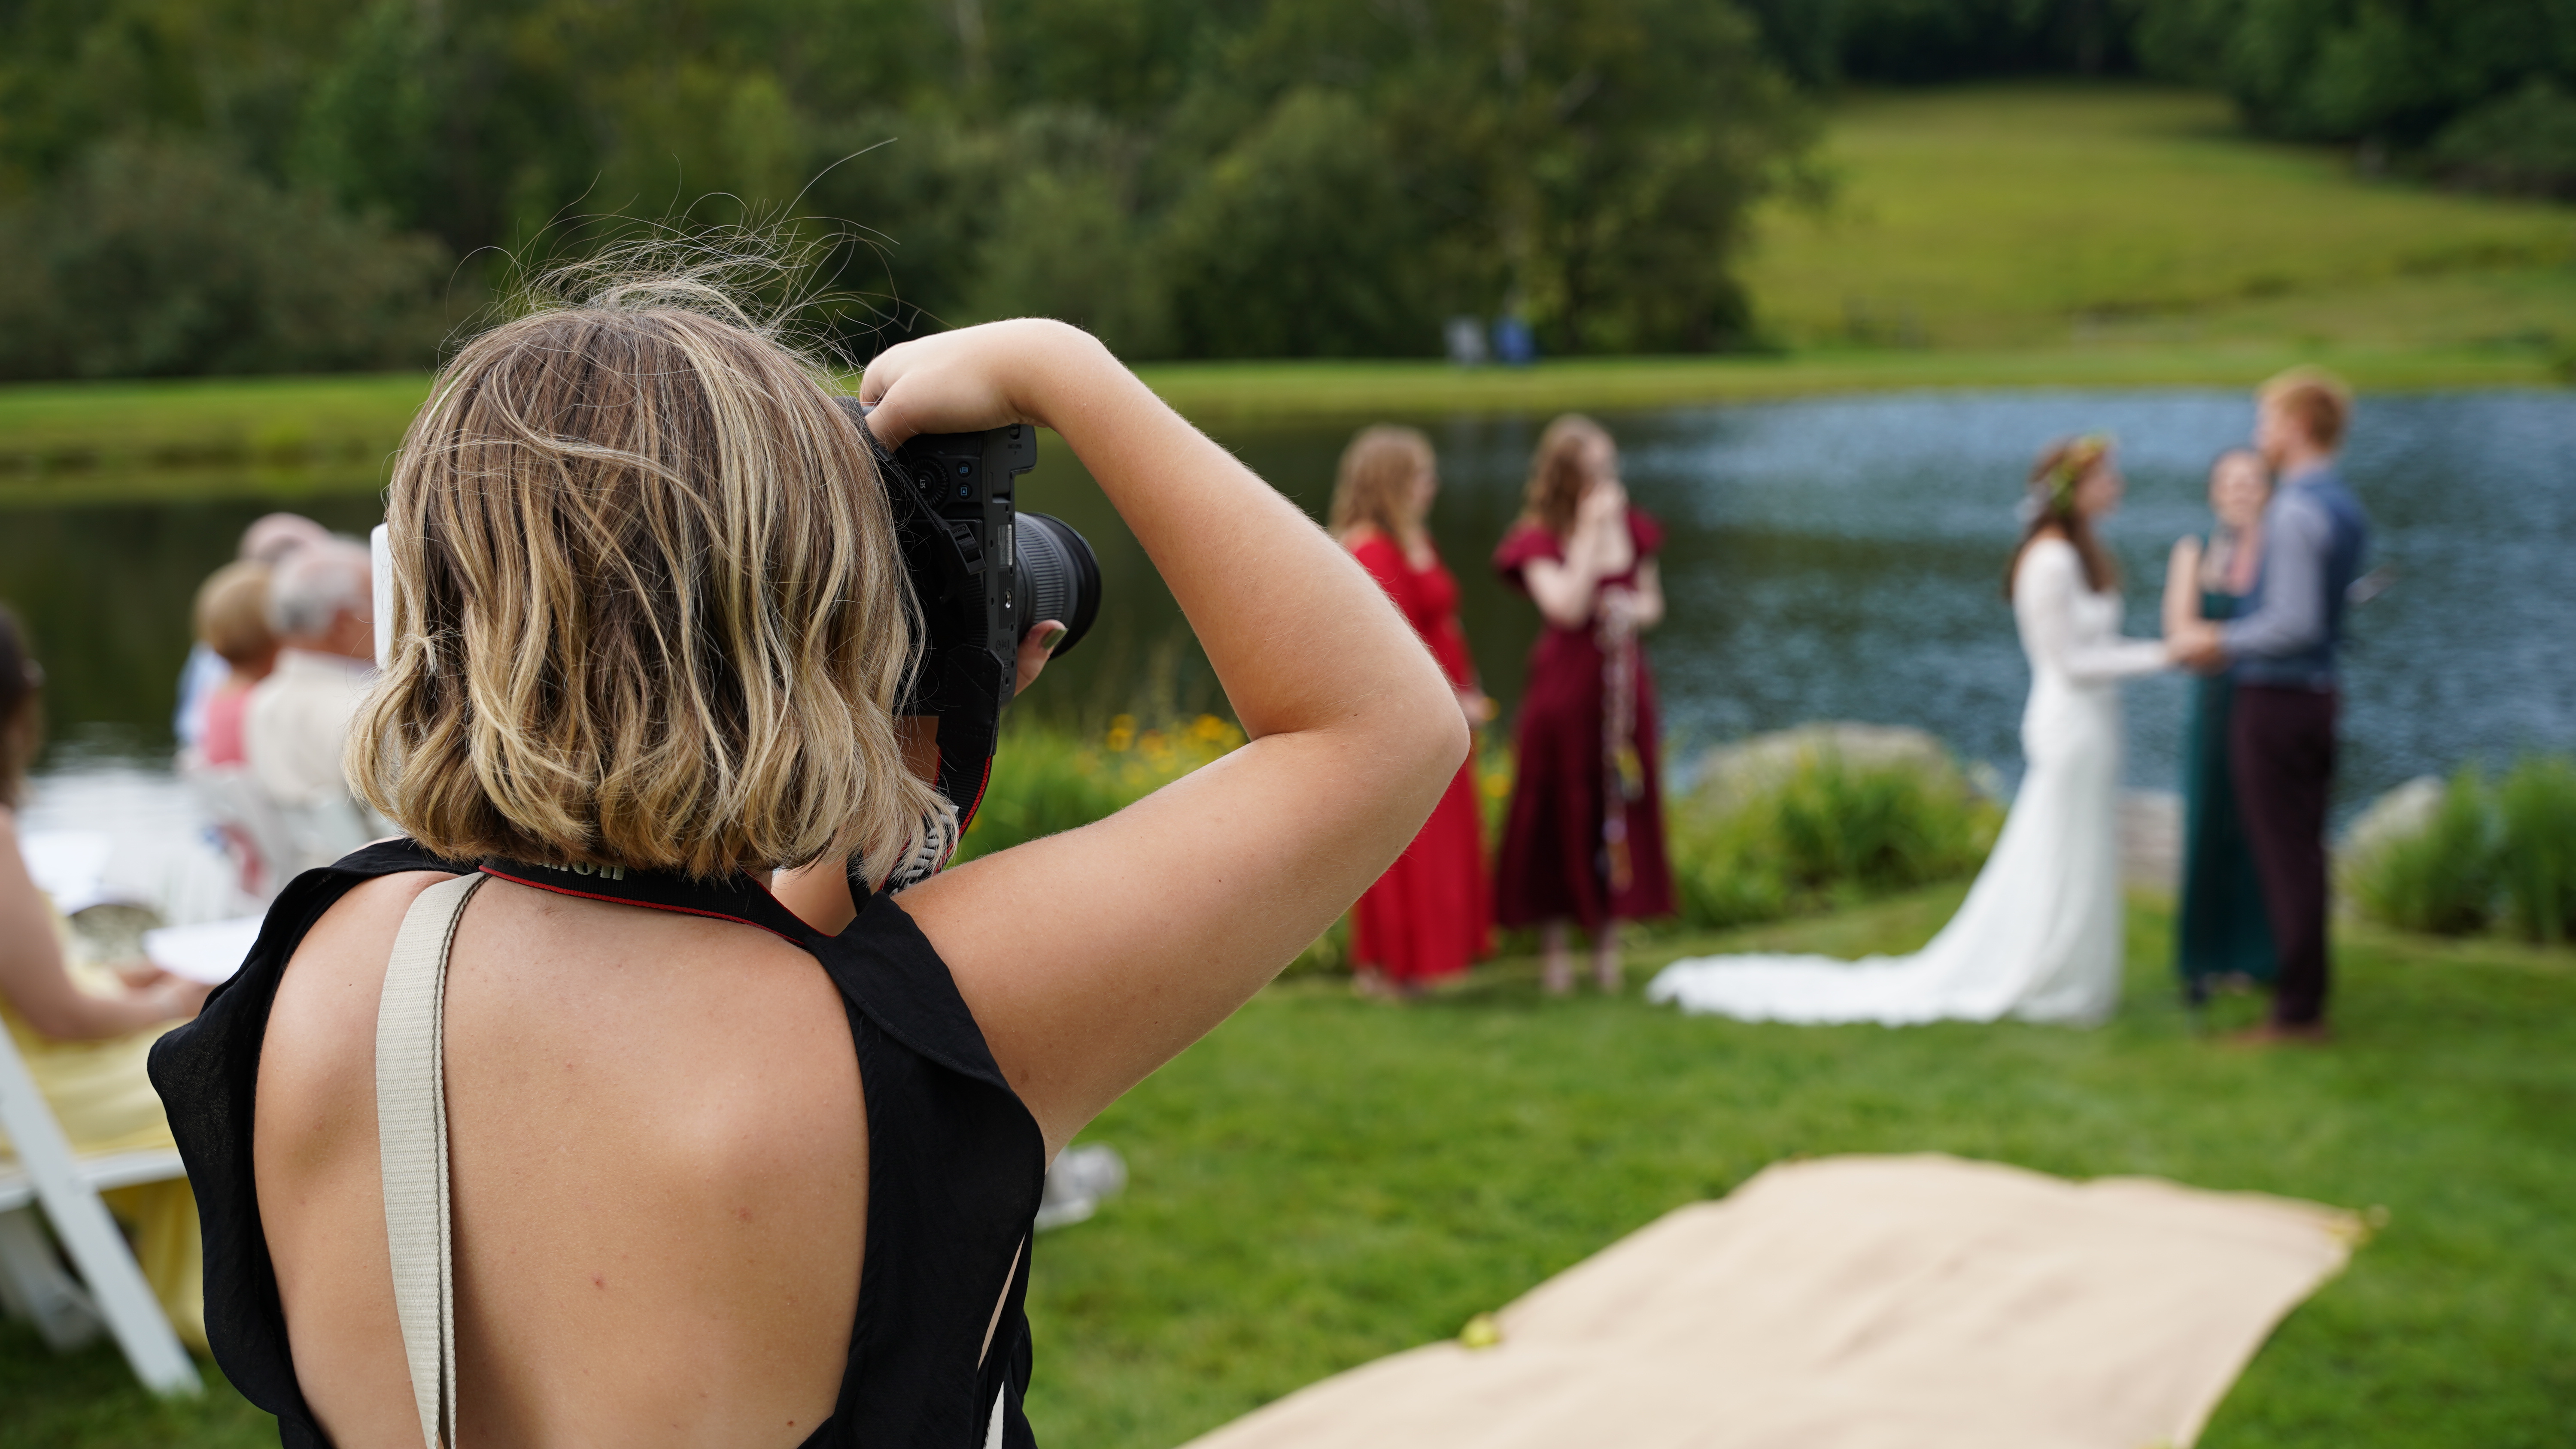 Emily photographing her first wedding.